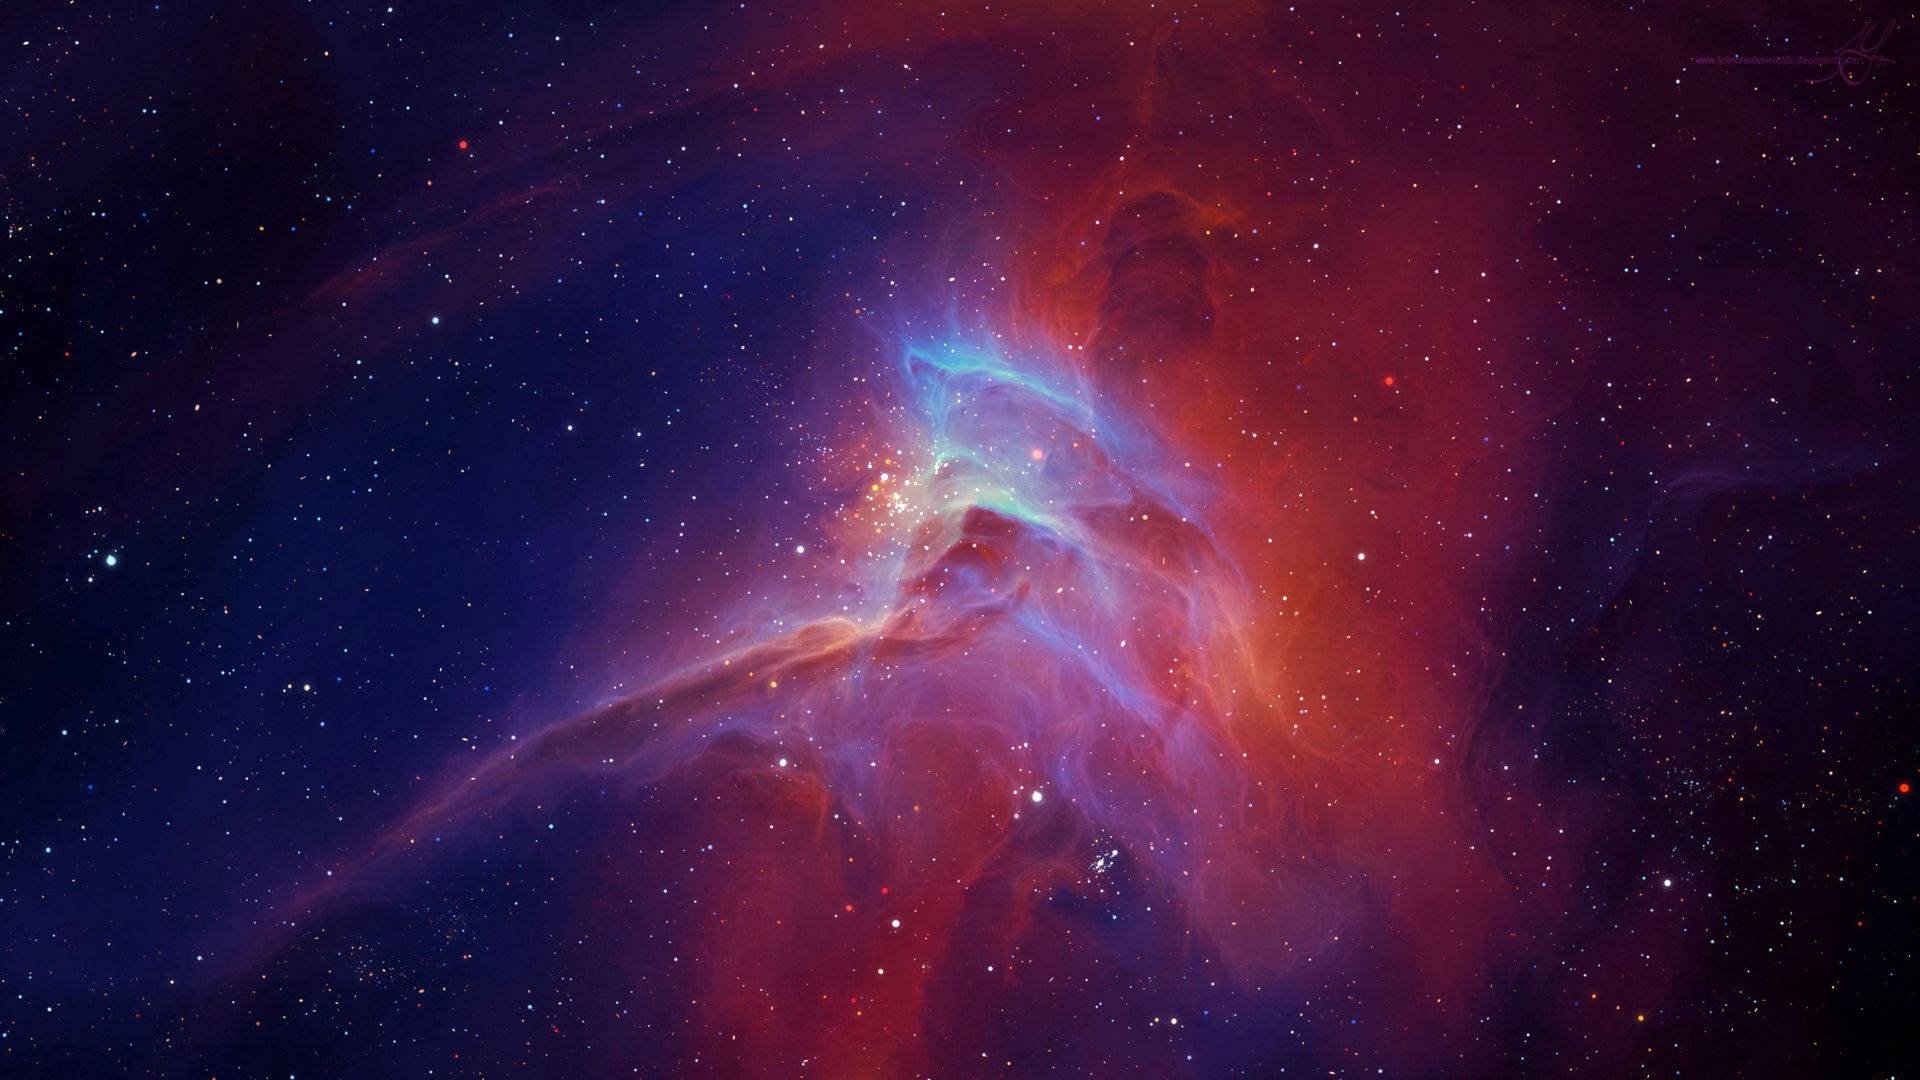 Glowing Star and Nebula Lightshow in the Universe Wallpaper